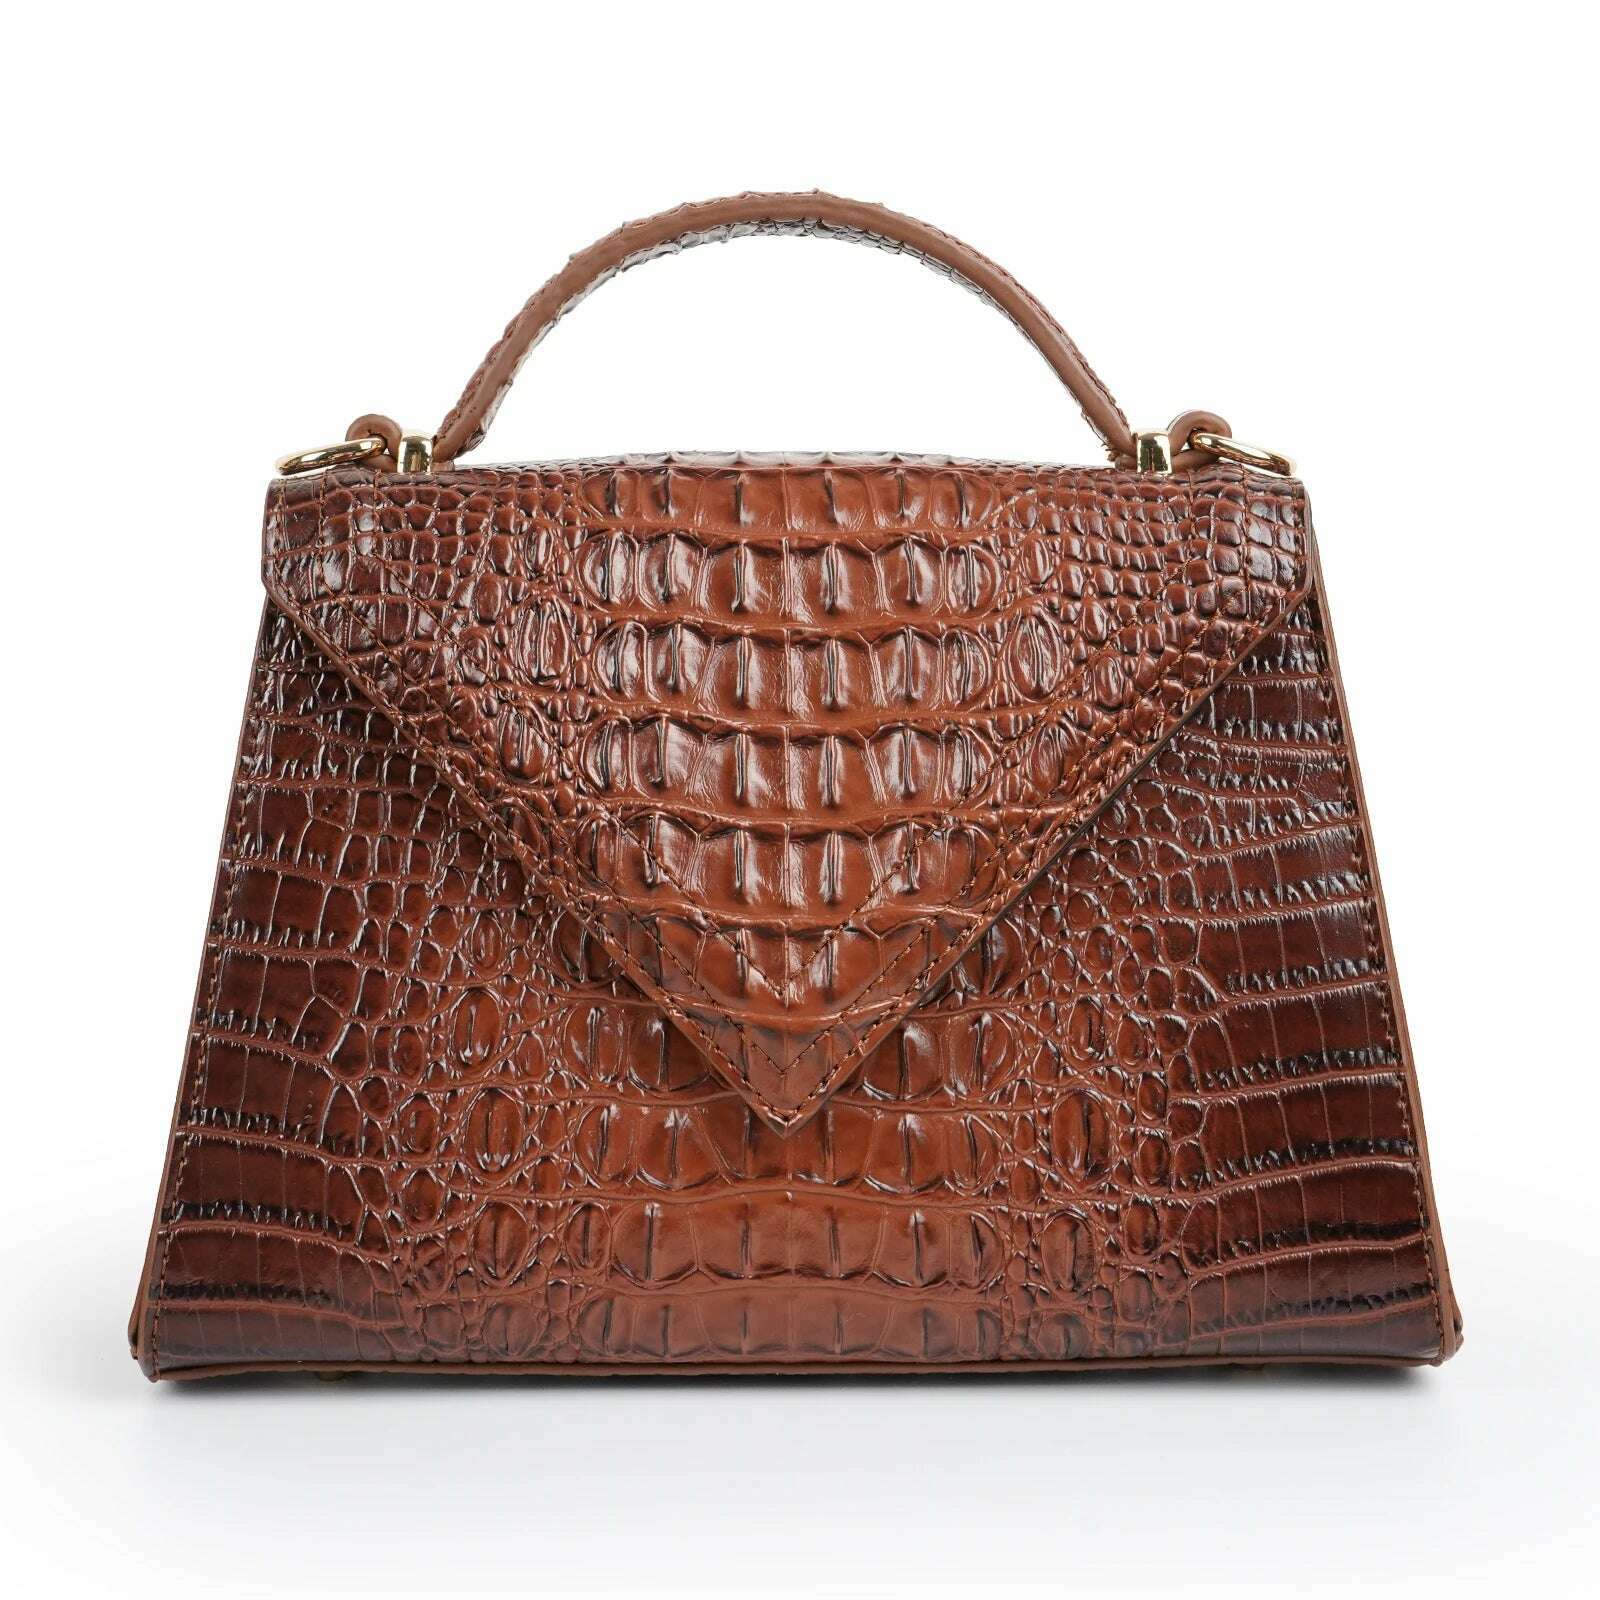 KIMLUD, Luxury Designer Handbag Brand Crossbody Bags for Women 2022 New Crocodile Pattern Leather Shoulder Bags Casual Tote Bag, Brown / CHINA, KIMLUD Womens Clothes